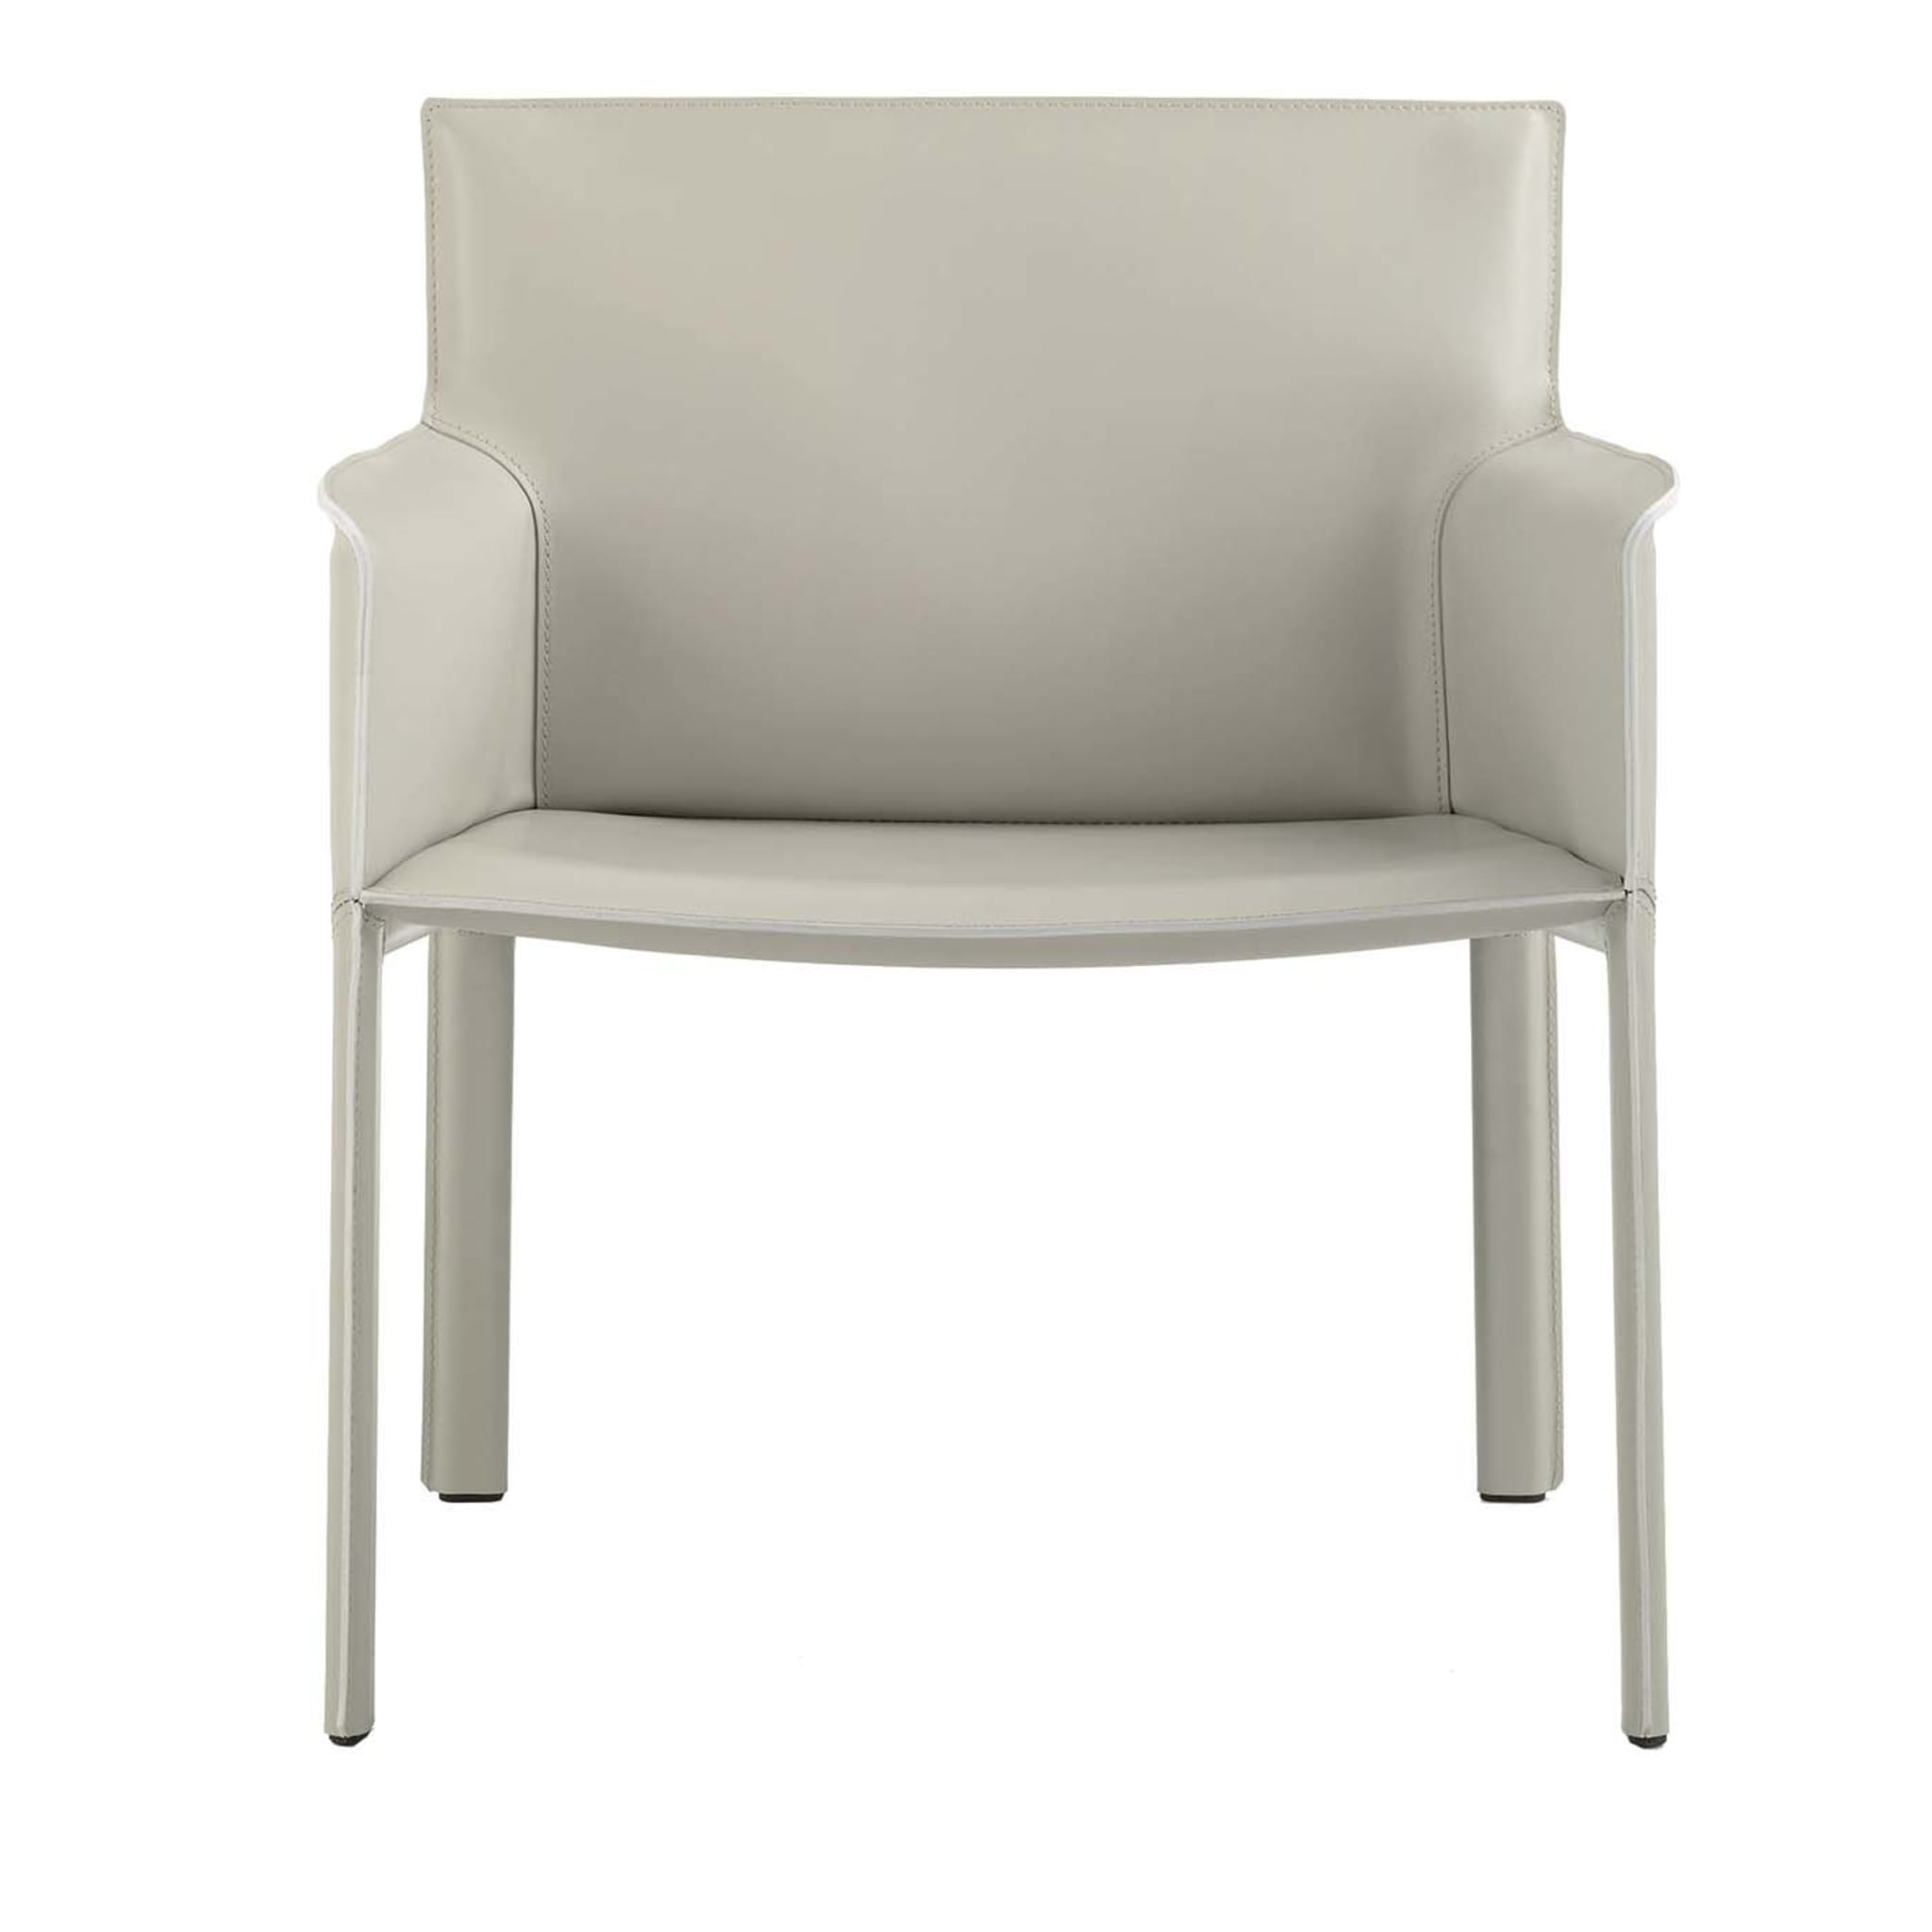 Pasqualina Relax Armchair by Grassi&Bianchi - Main view